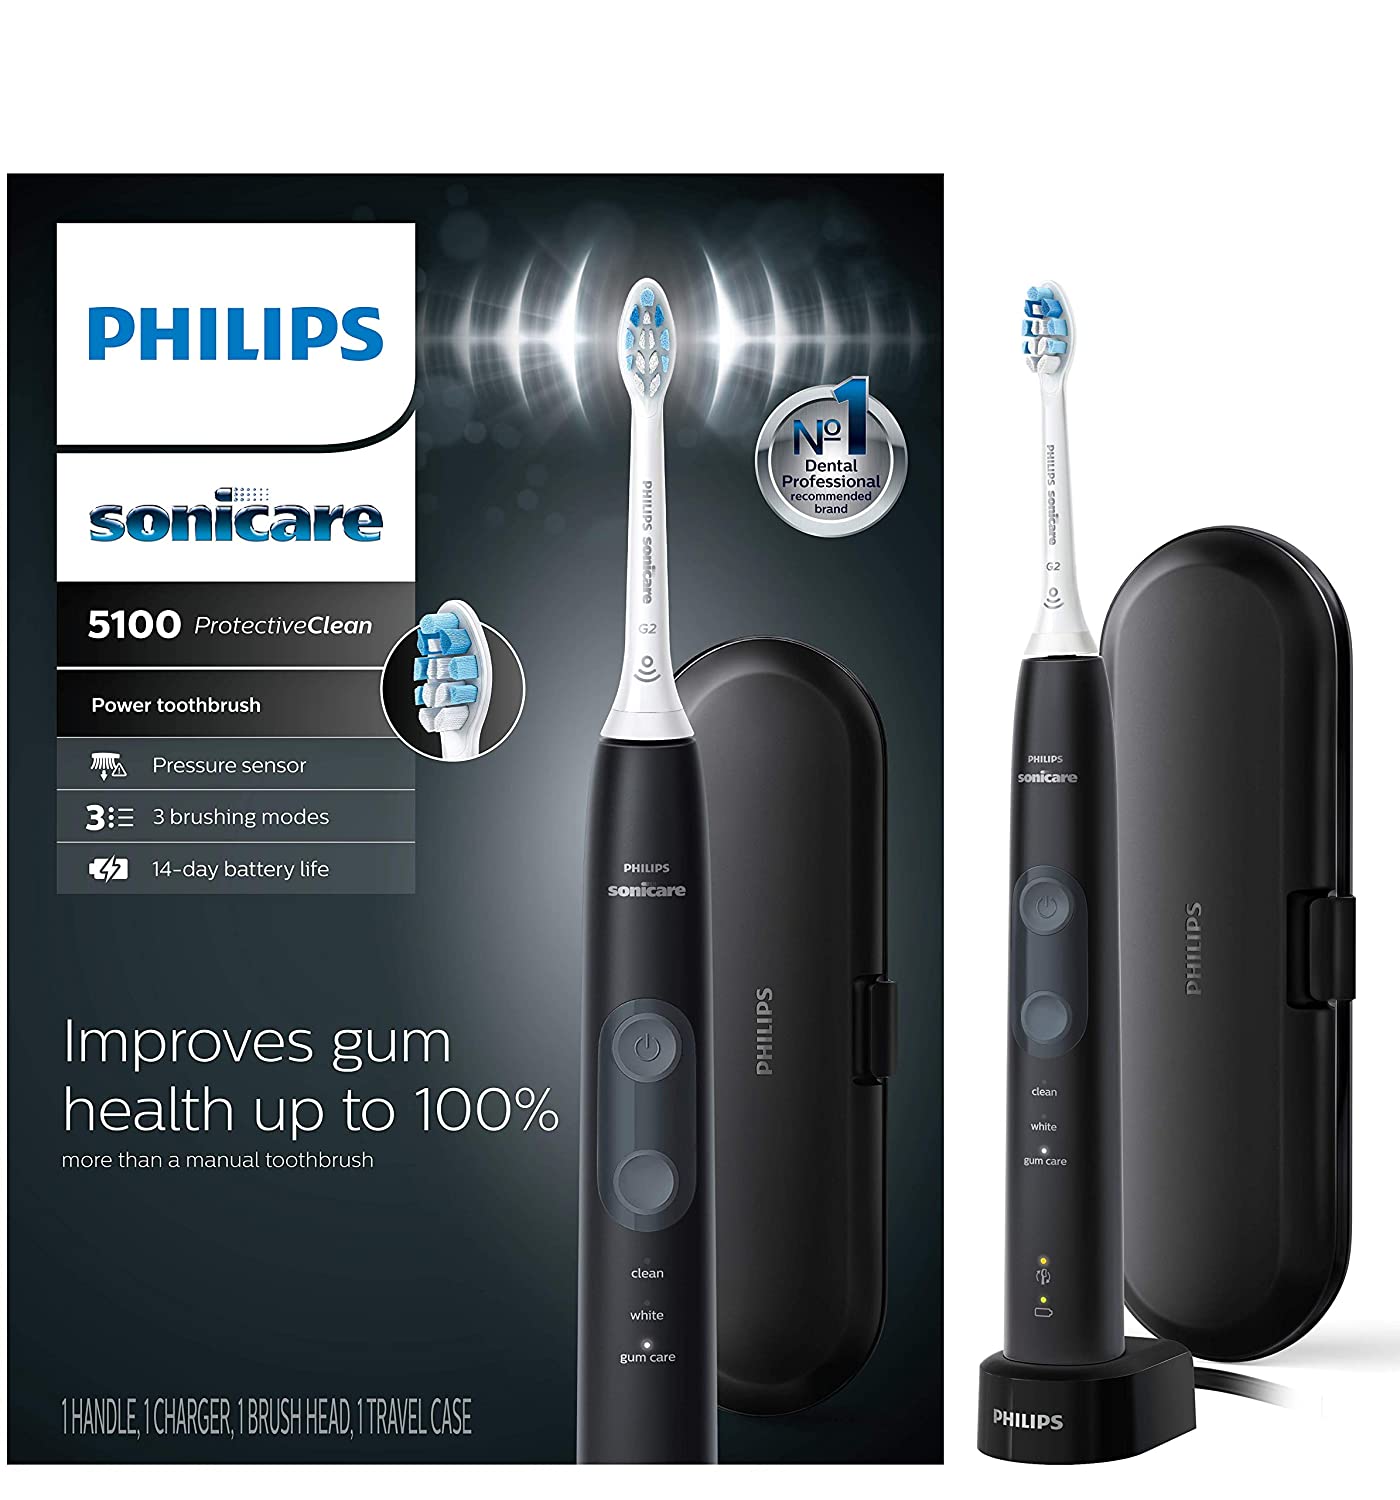 Philips Sonicare ProtectiveClean Ergonomic Electric Toothbrush